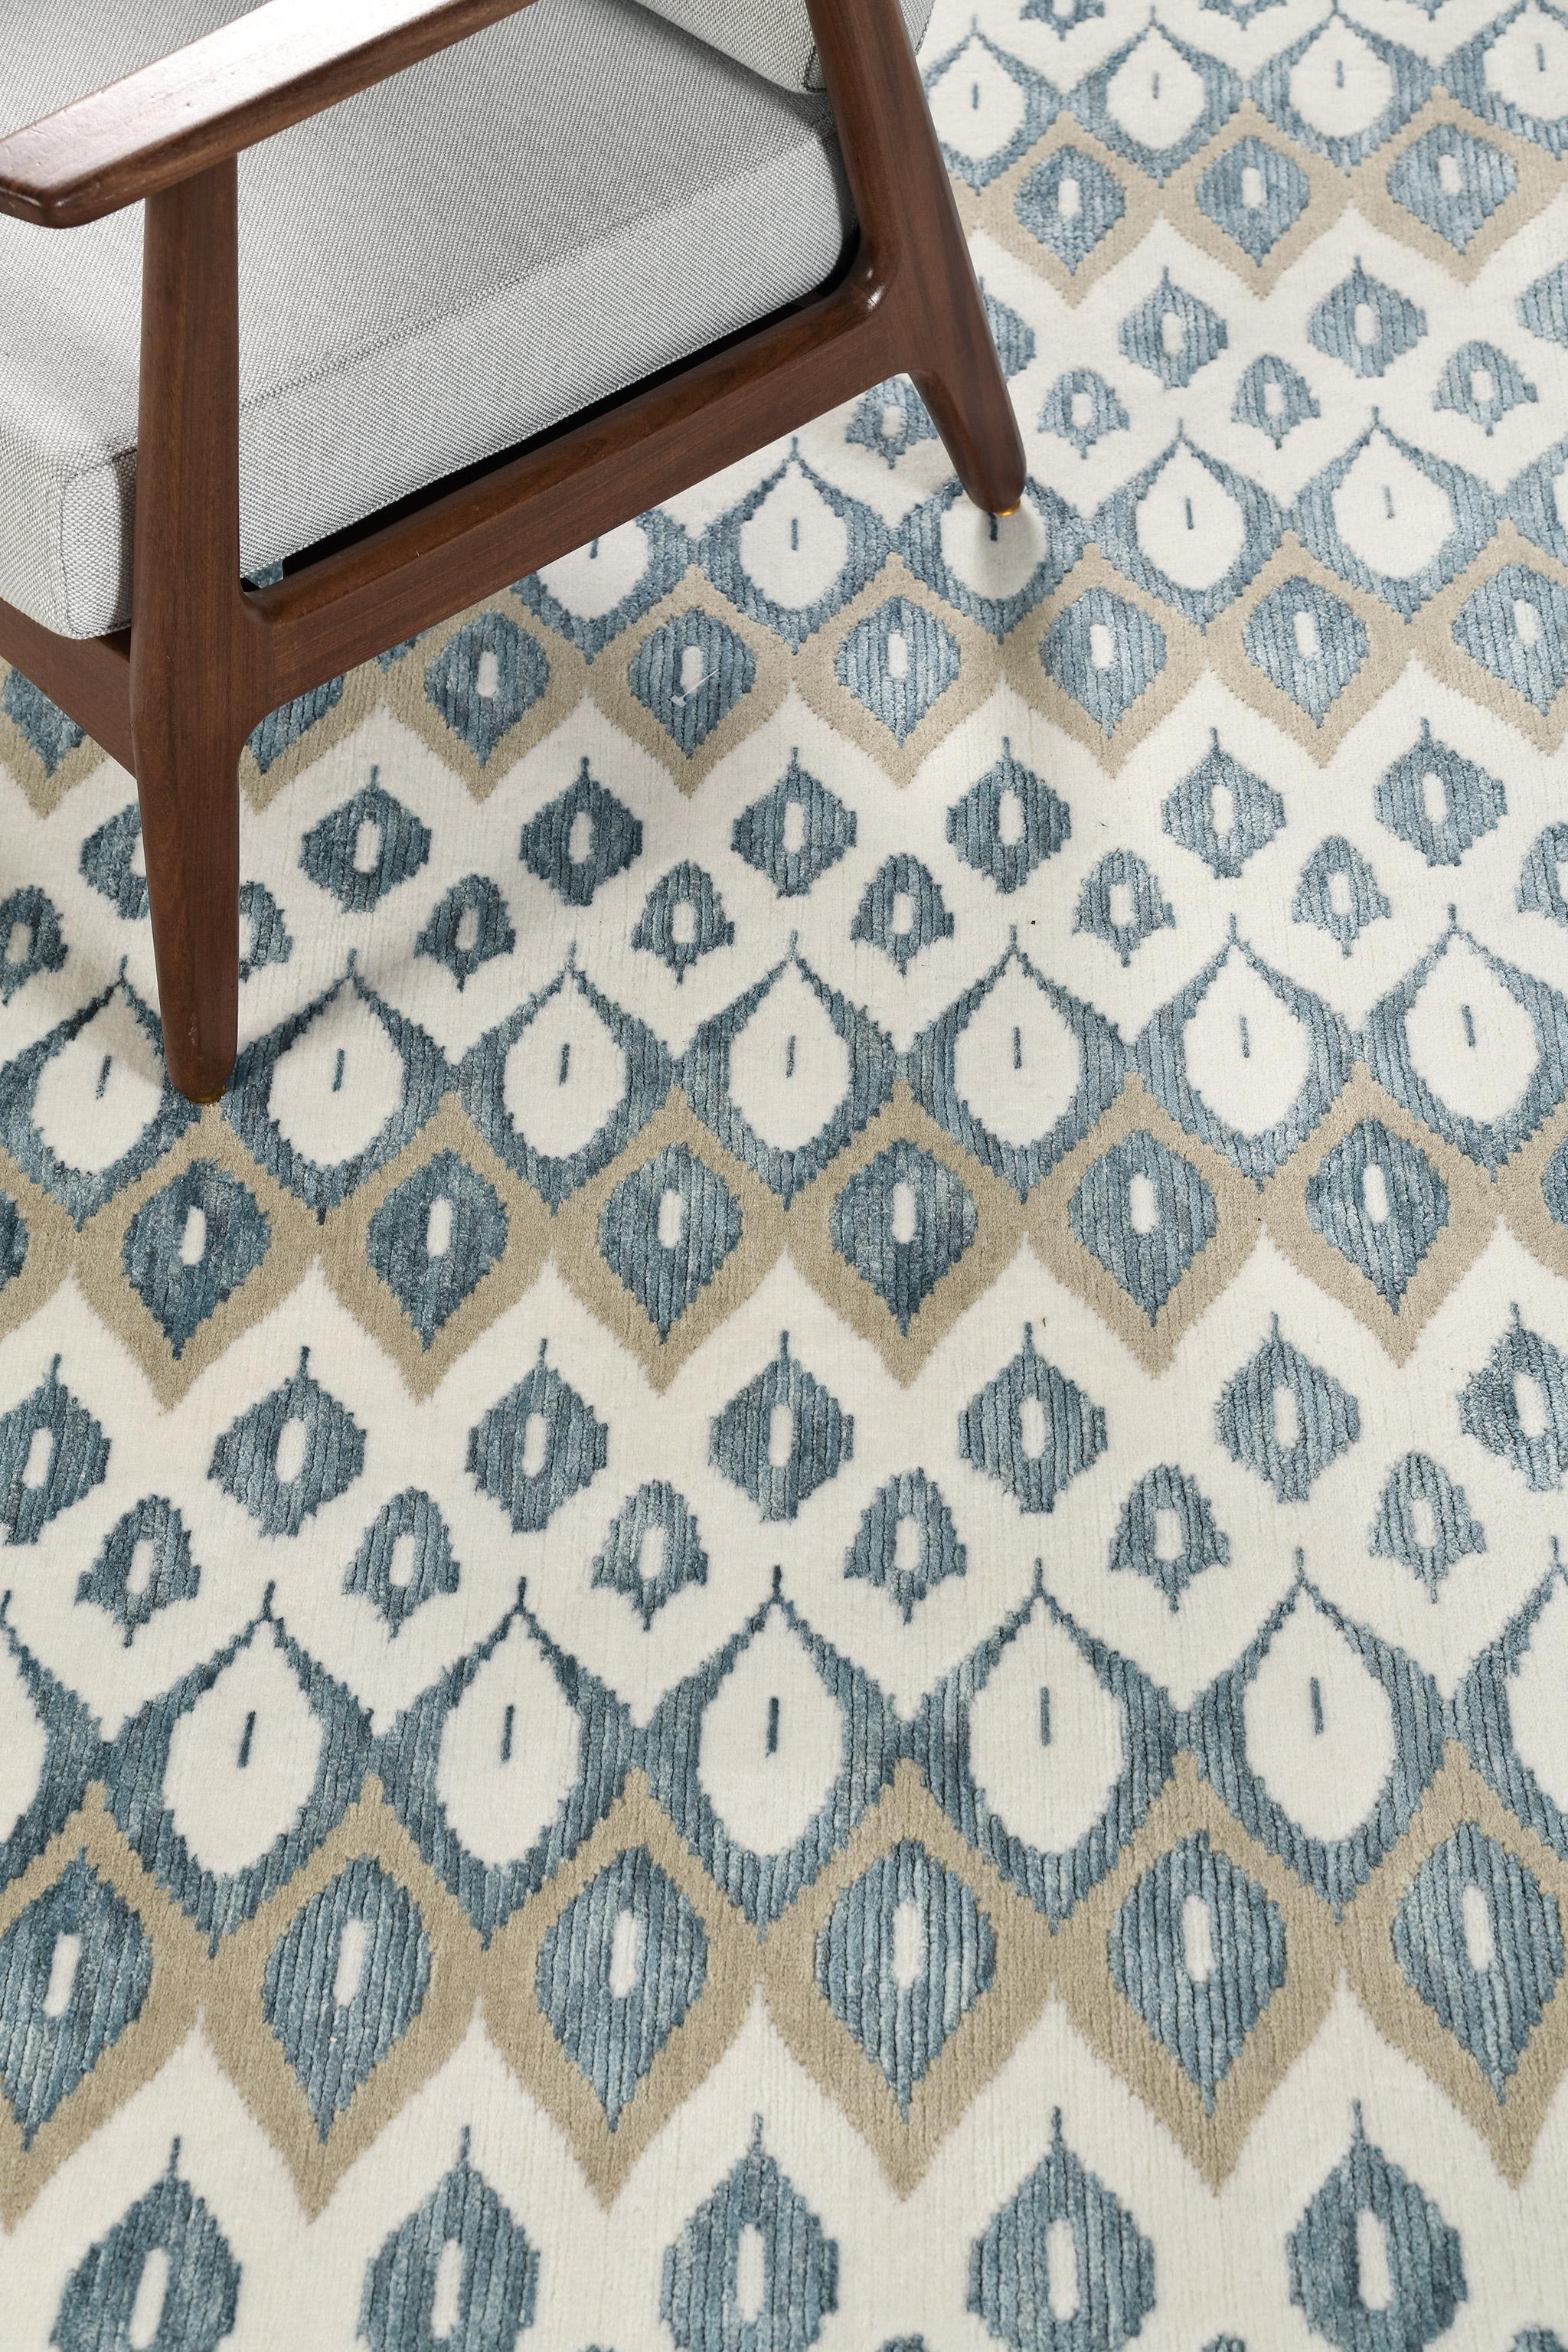 Candela is a wool and silk pile that comes from the home of the infamous Allure Collection. Color schemes are Bluegreen, khaki, and white. These transitional patterns will give an extra edge to its ethereal entrance that will give impressive scenery